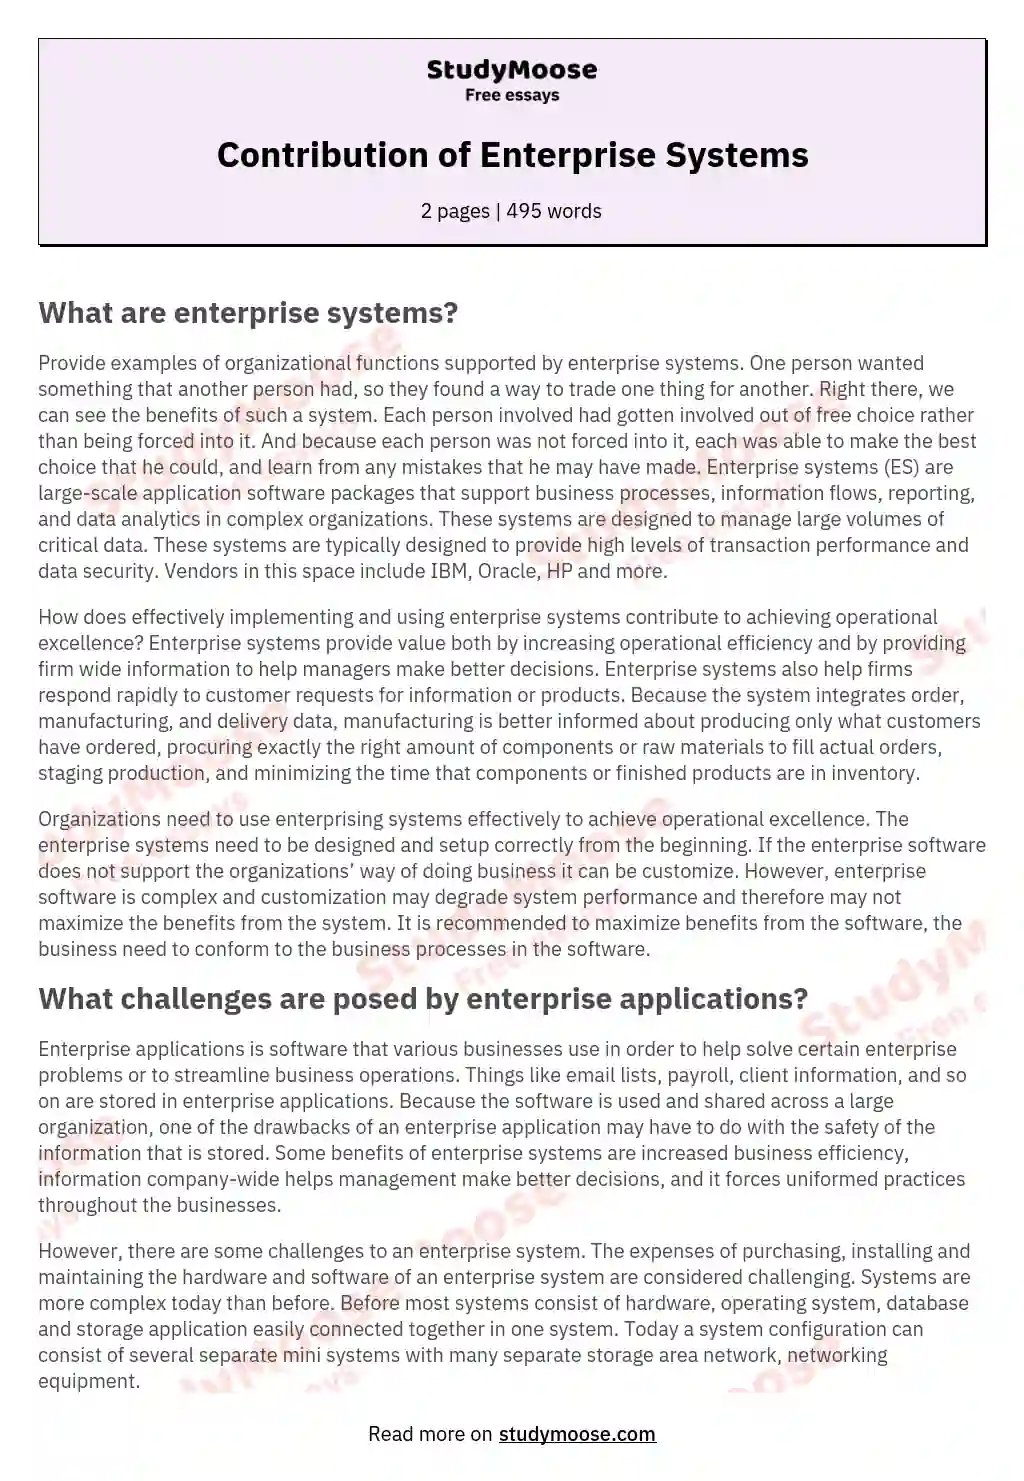 Contribution of Enterprise Systems essay